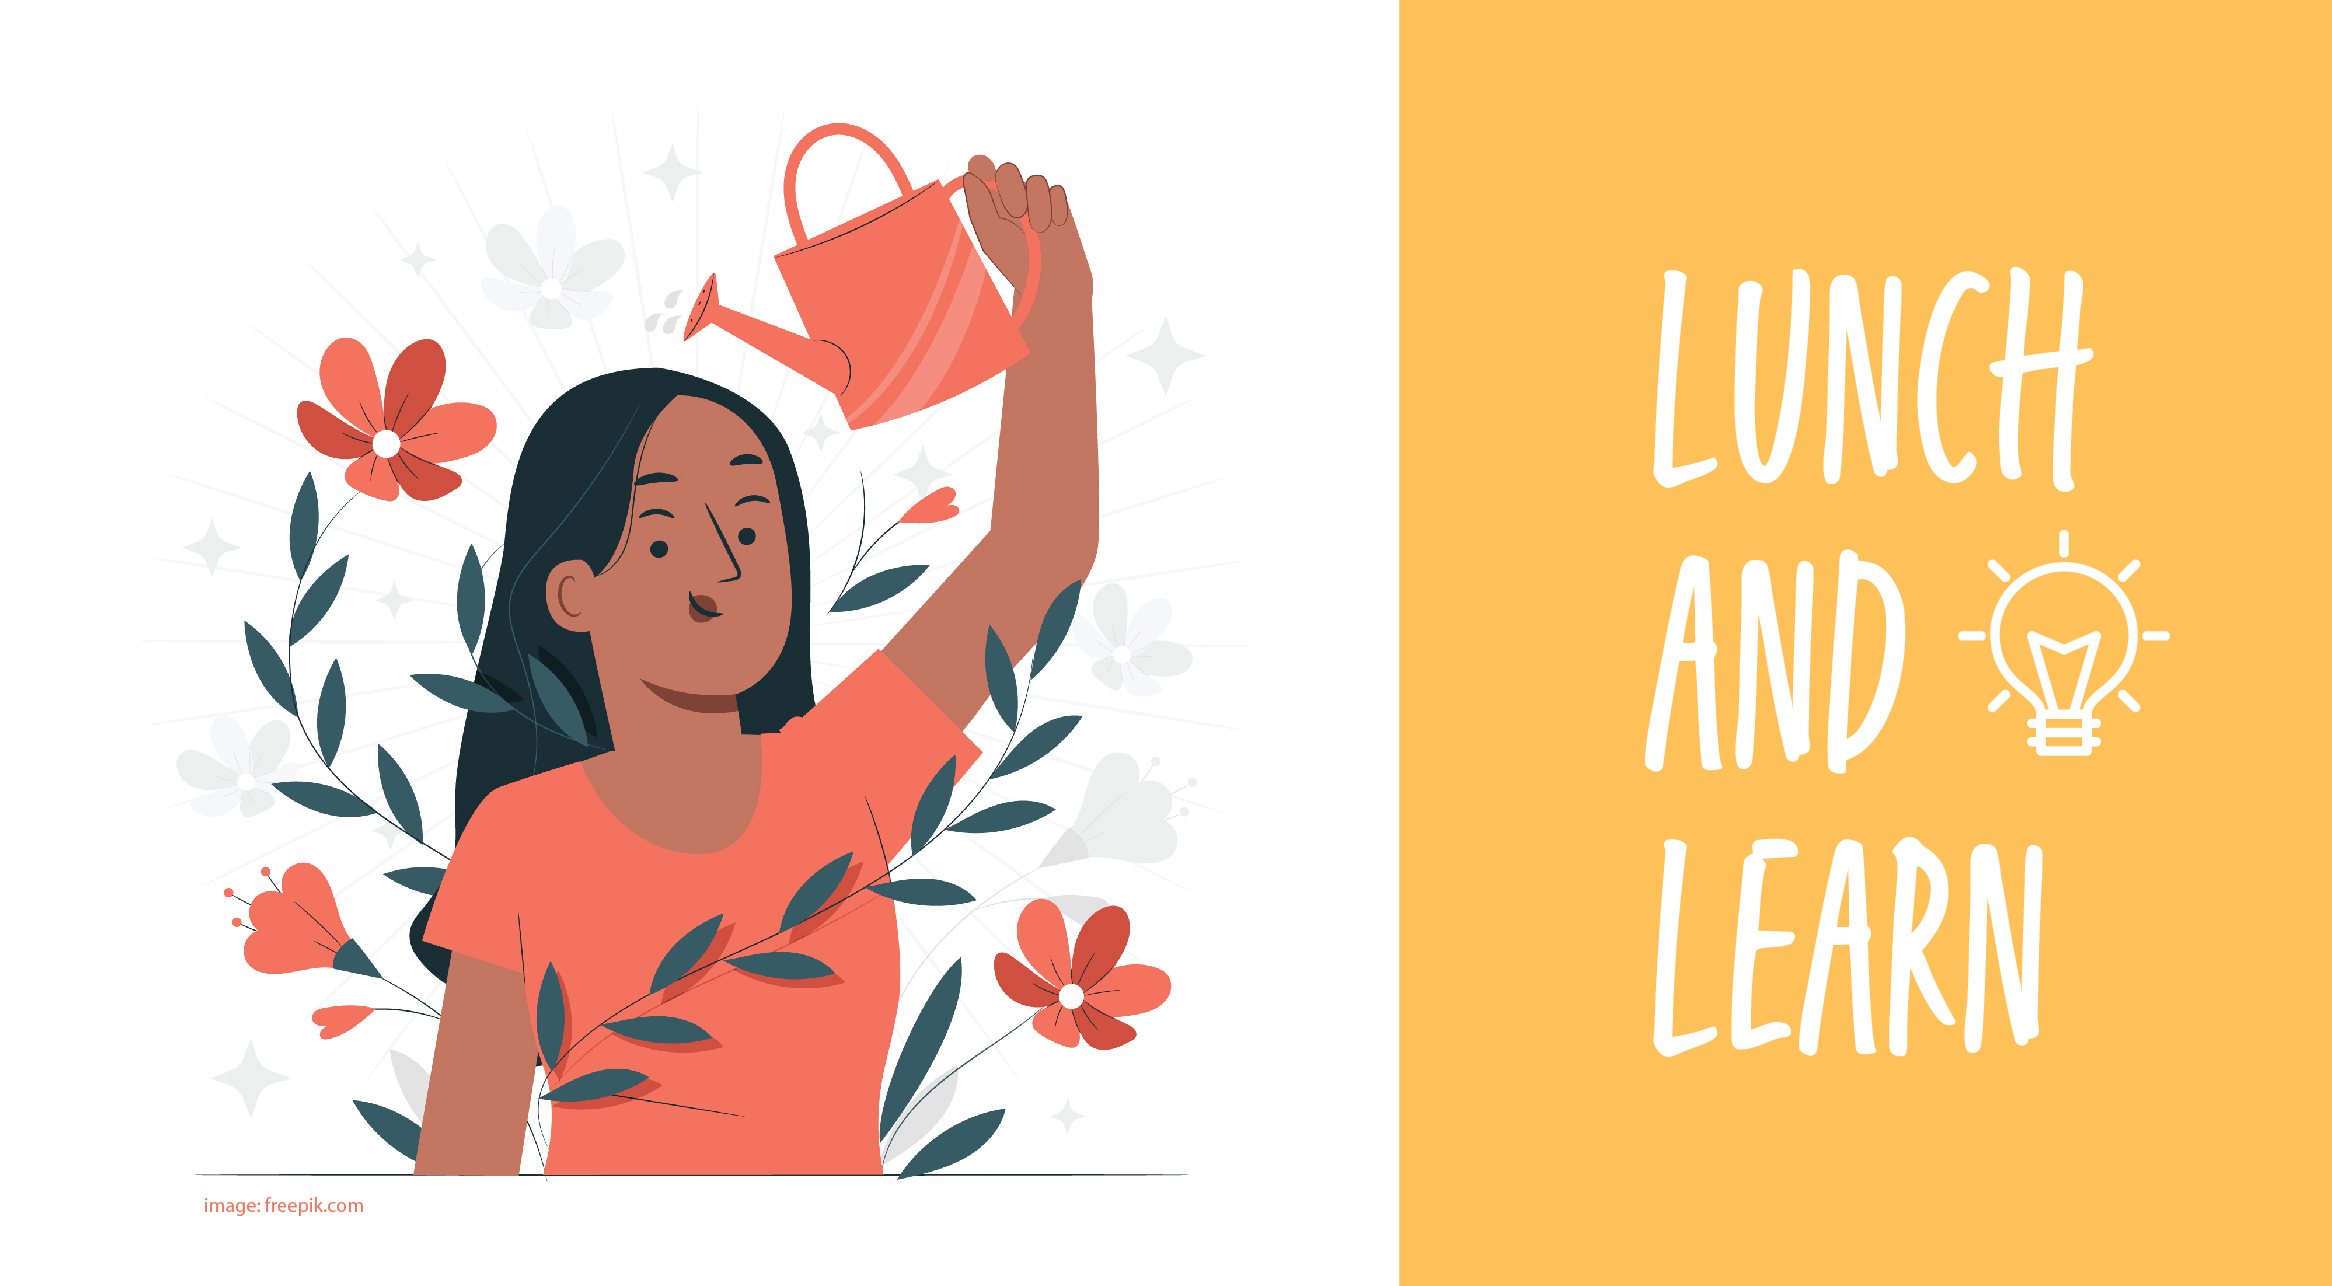 Illustrated person with long dark hair. They are watering themselves with a watering can, and leaves and flowers grow around them. Text reads "Lunch and Learn".